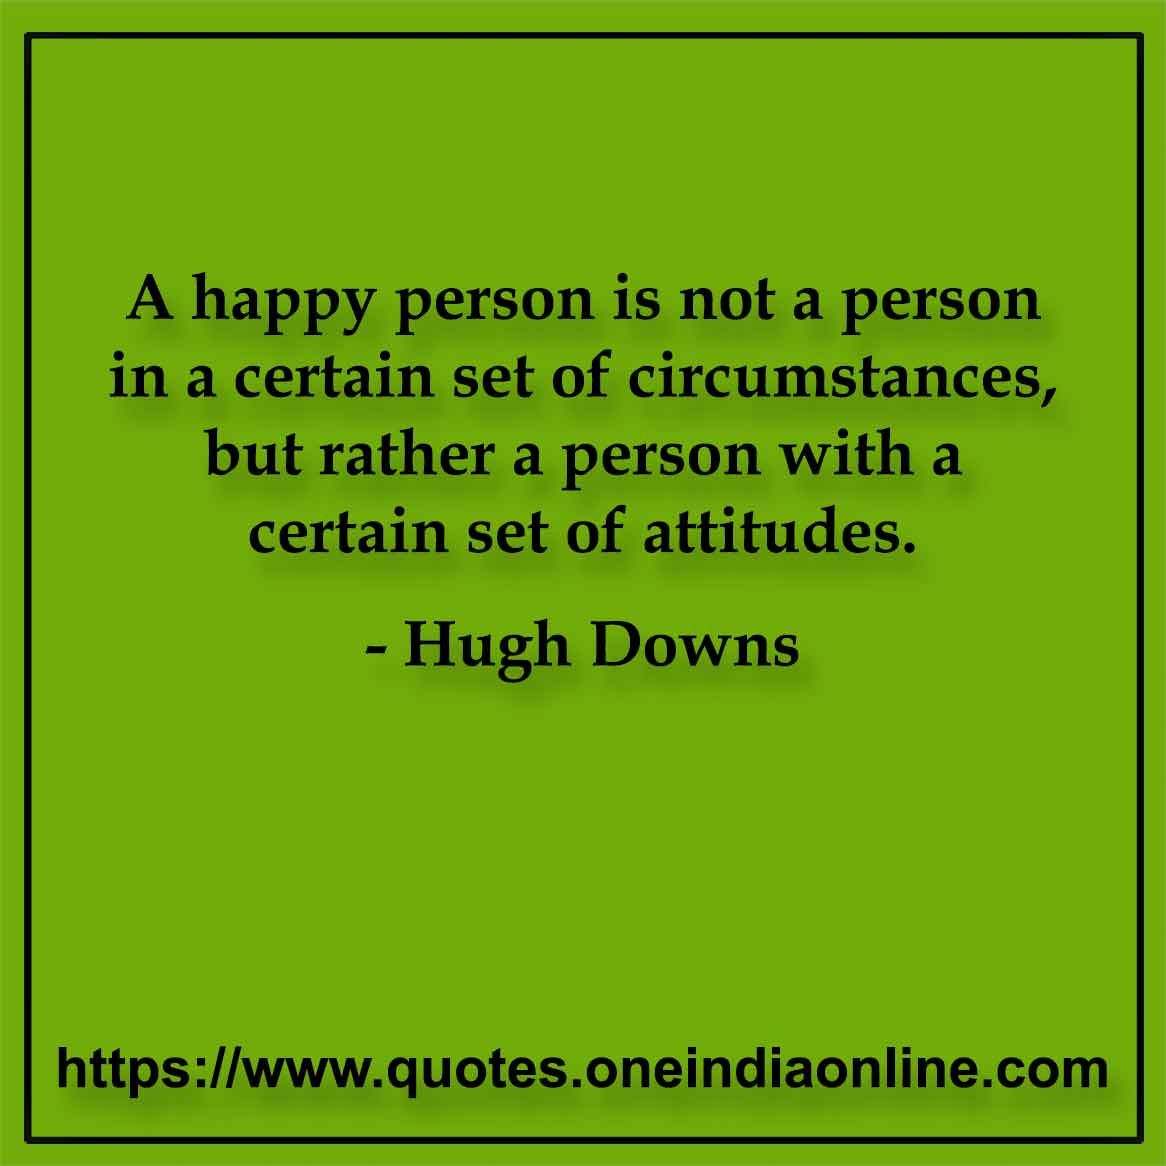 A happy person is not a person in a certain set of circumstances, but rather a person with a certain set of attitudes.

- Famous Happy Quotes by Hugh Downs